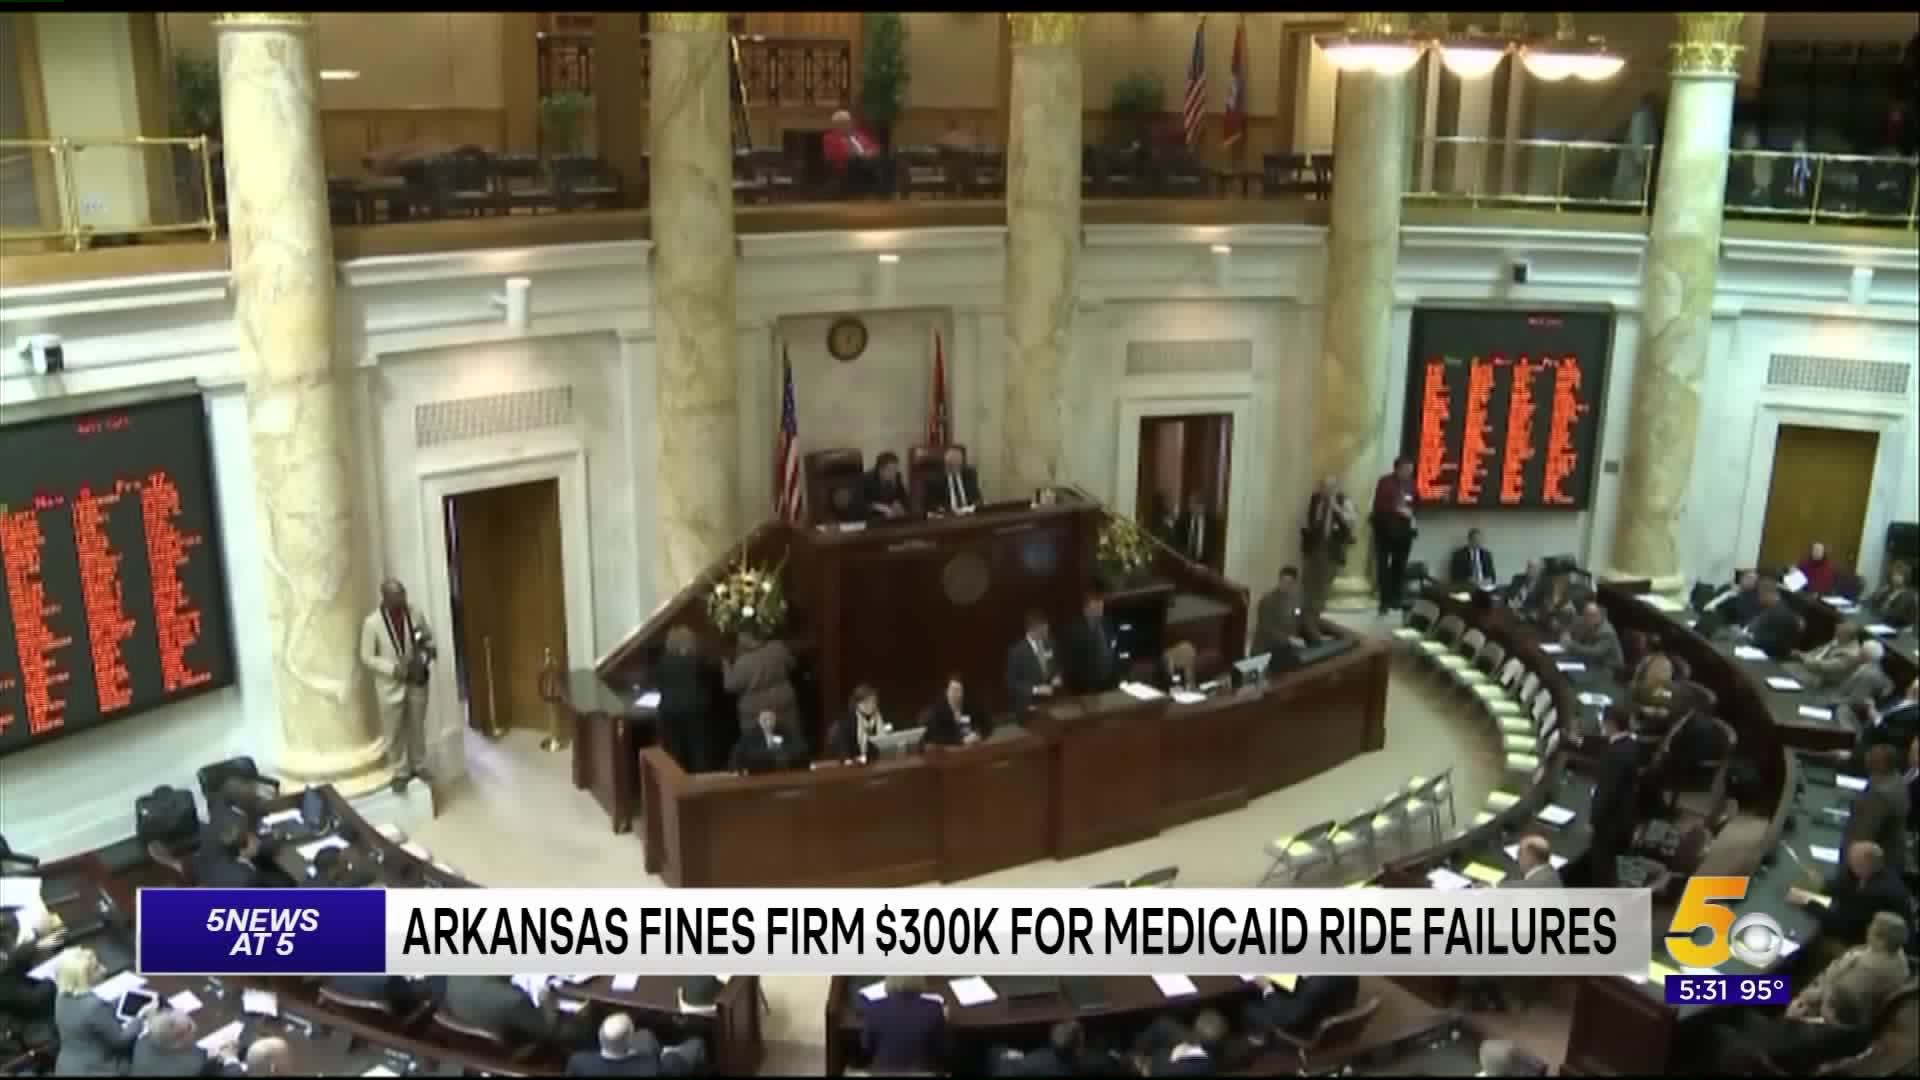 Arkansas Fines Firm $300,000 For Medicaid Ride Failures